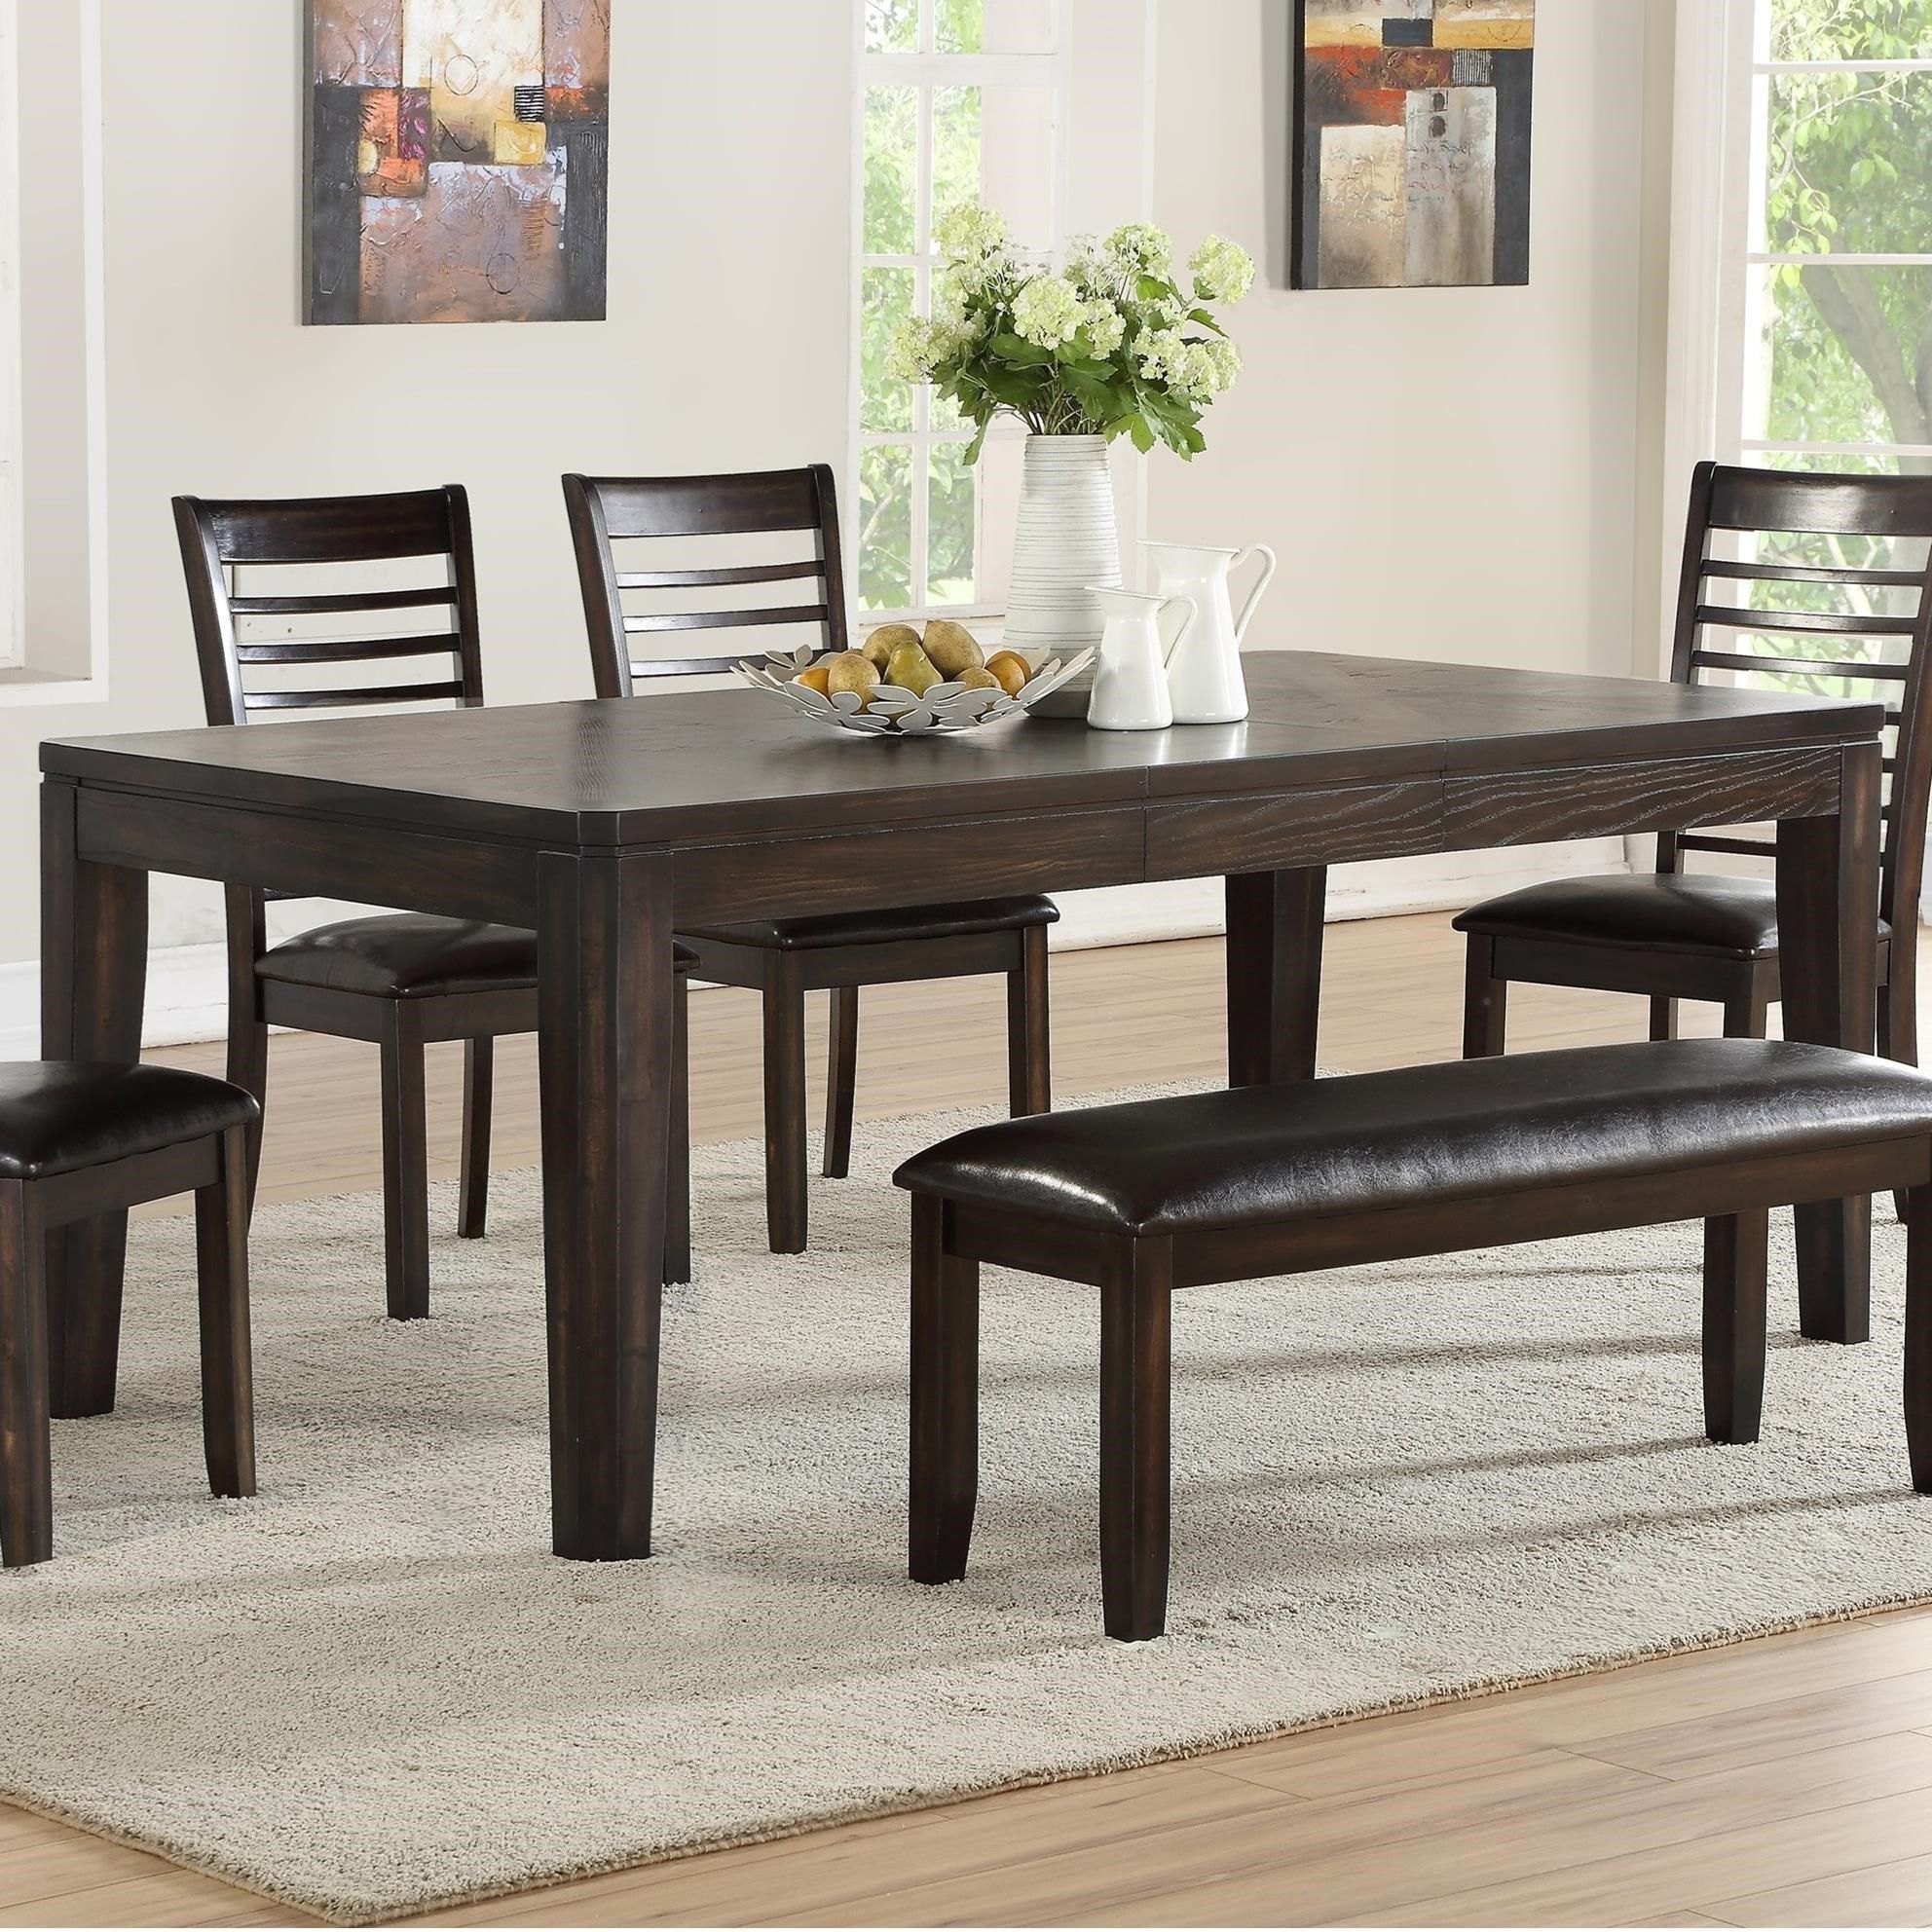 2019 Steve Silver Ally Dining Table With 18" Leaf (View 6 of 15)